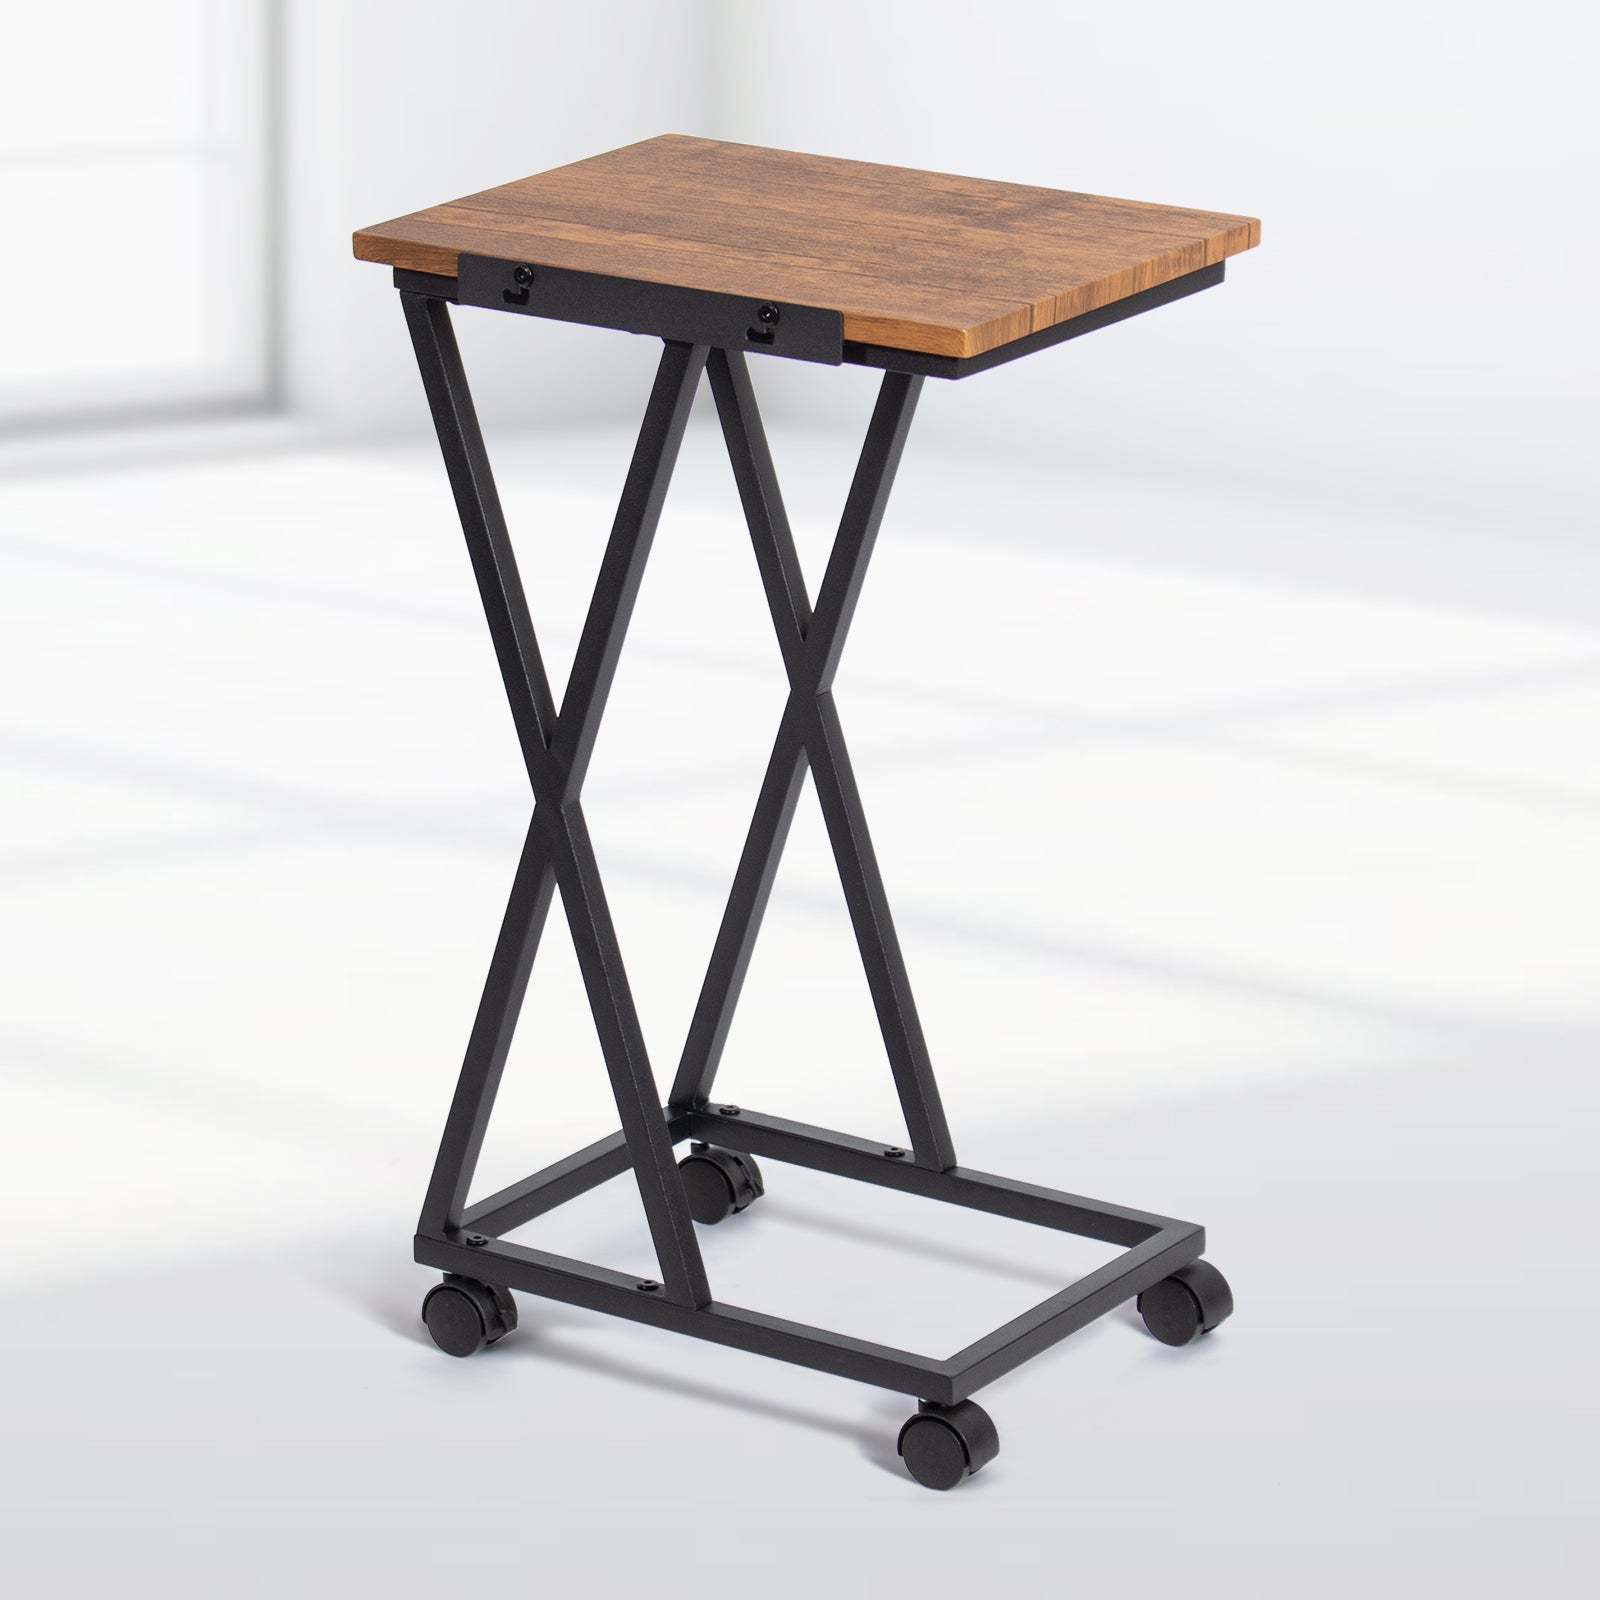 Todeco-Side-Table-with-Tilting-Top-Steel-End-Table-with-Casters-and-Adjustable-Feet-Easy-Assembly-for-Living-Room-Bedroom-Balcony-Brown-and-Black-Side-Table